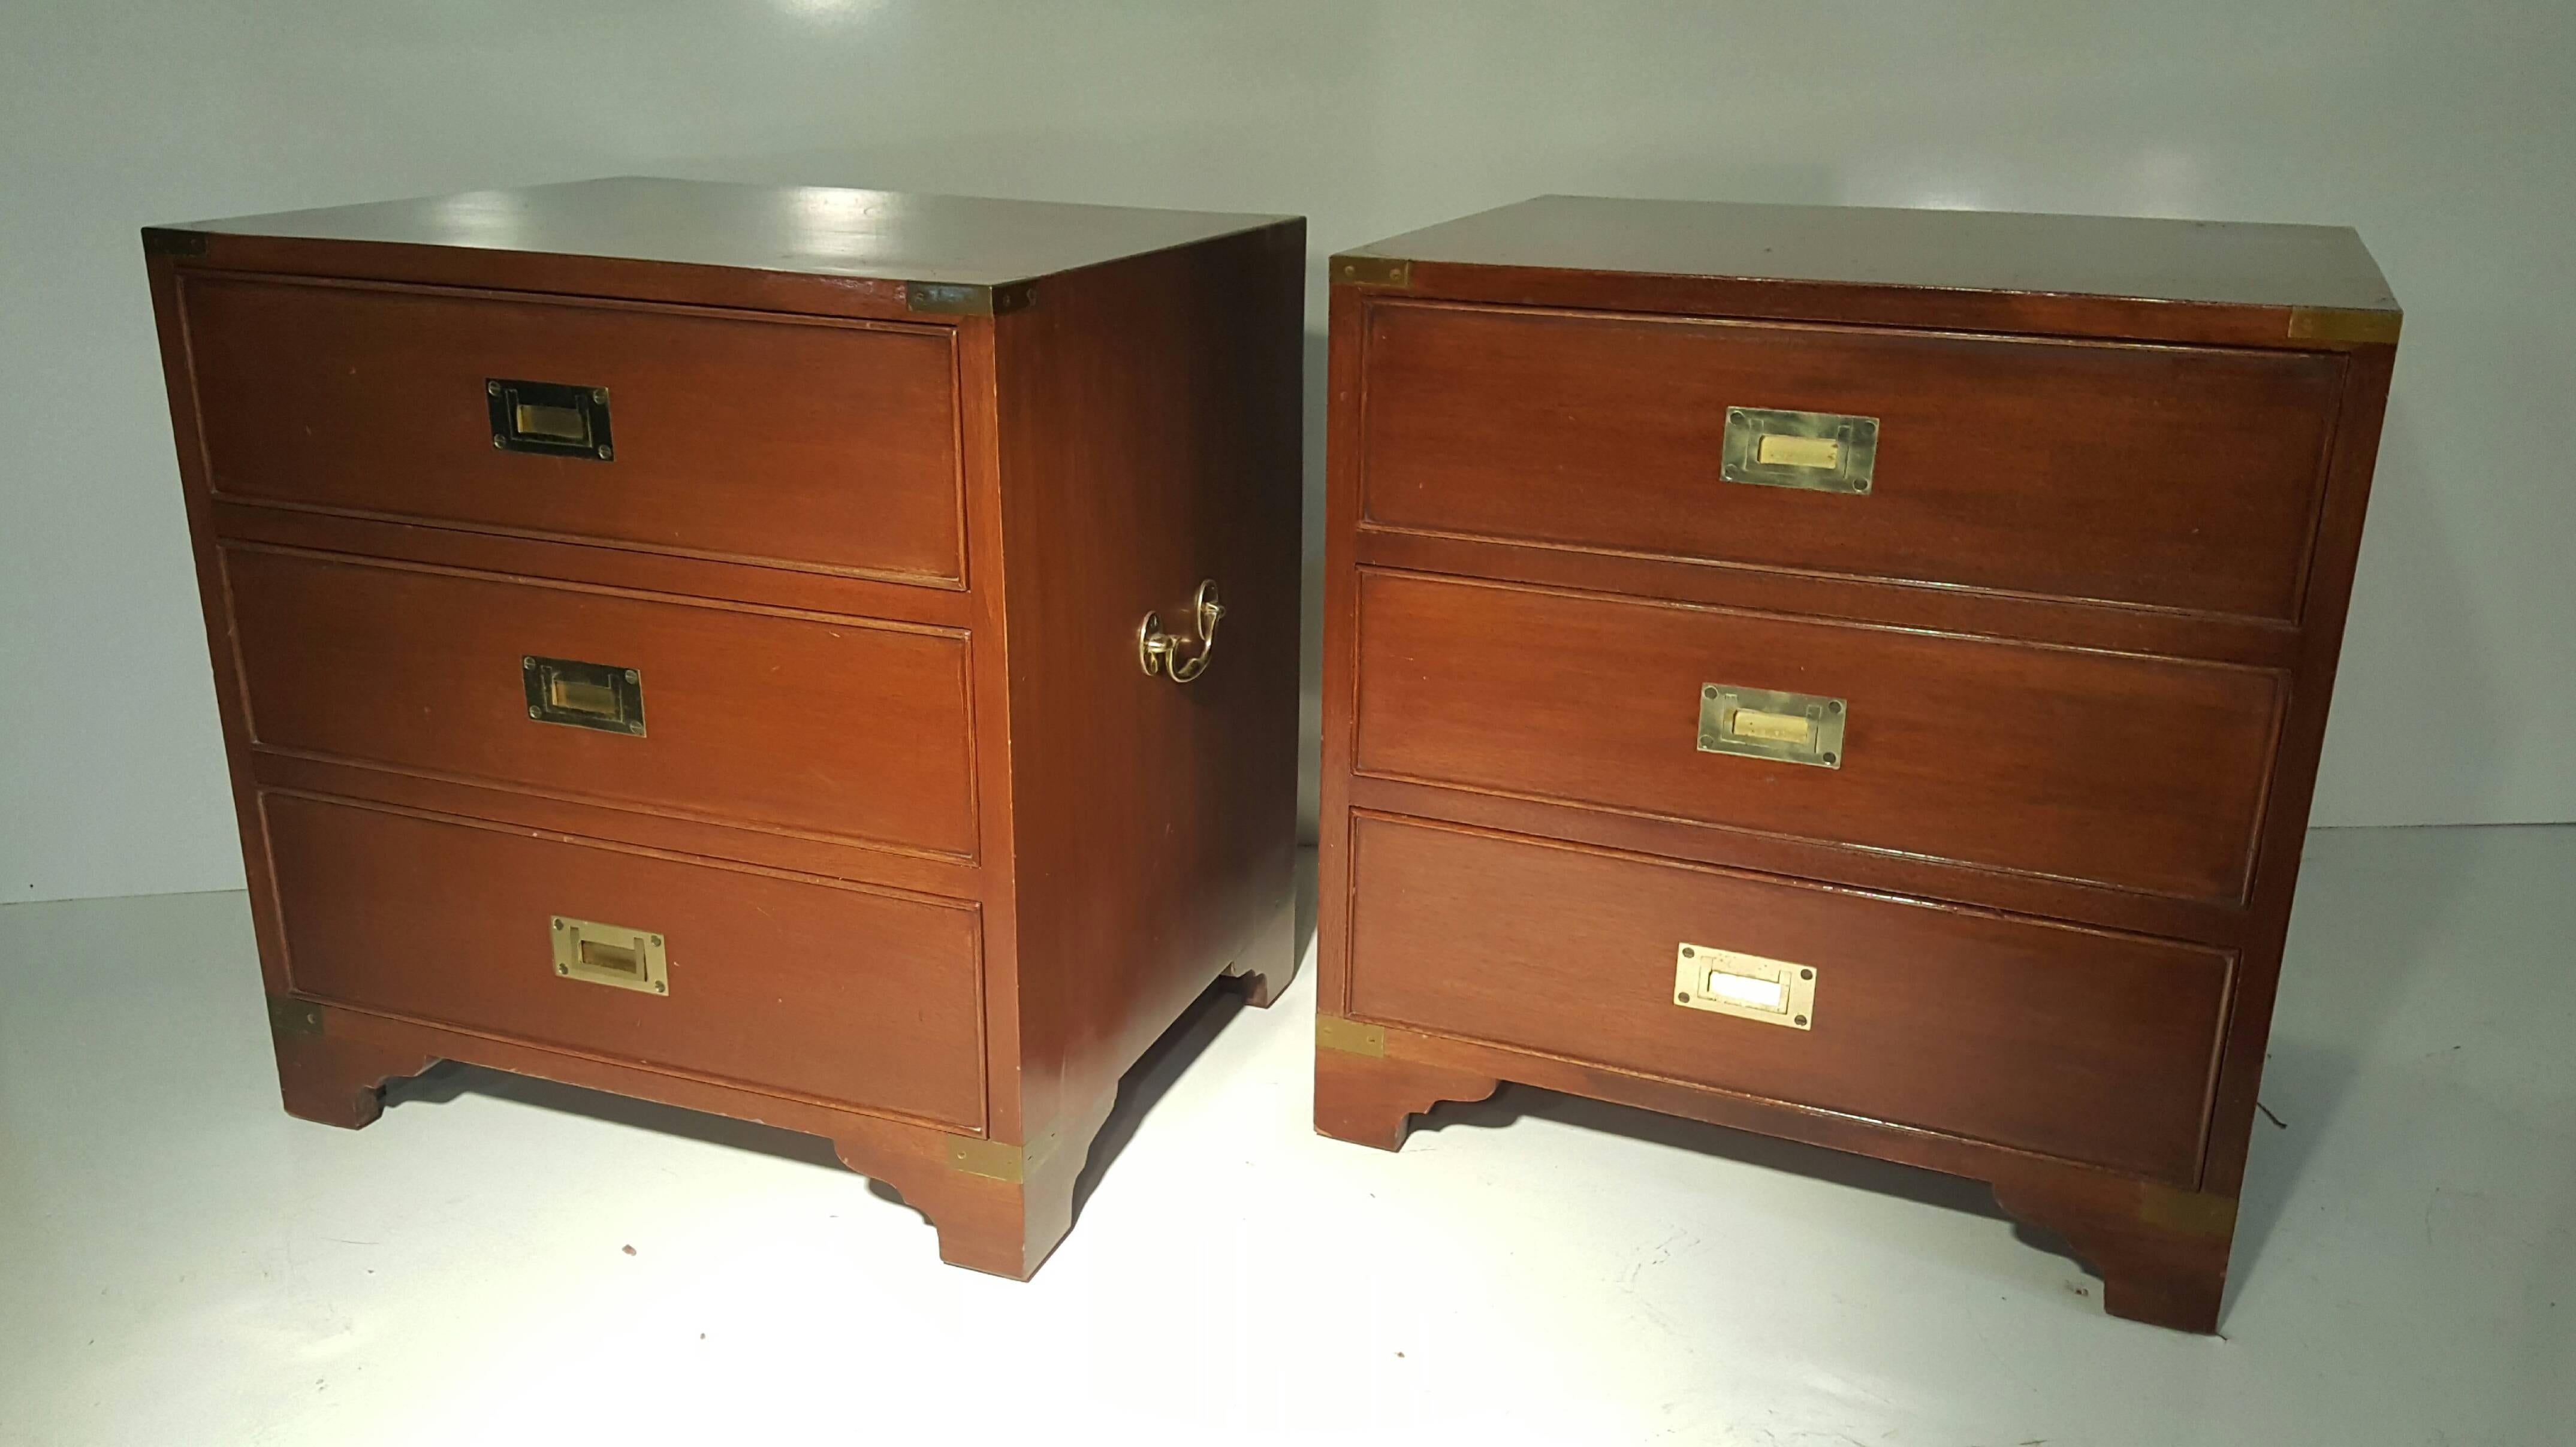 Classic pair of mahogany and brass Campaign stands/chest. Brass-mounted Campaign chest featuring three drawers with flush brass handles and larger handles on each side. This small chest of drawers or commode would make a great nightstand or bedside